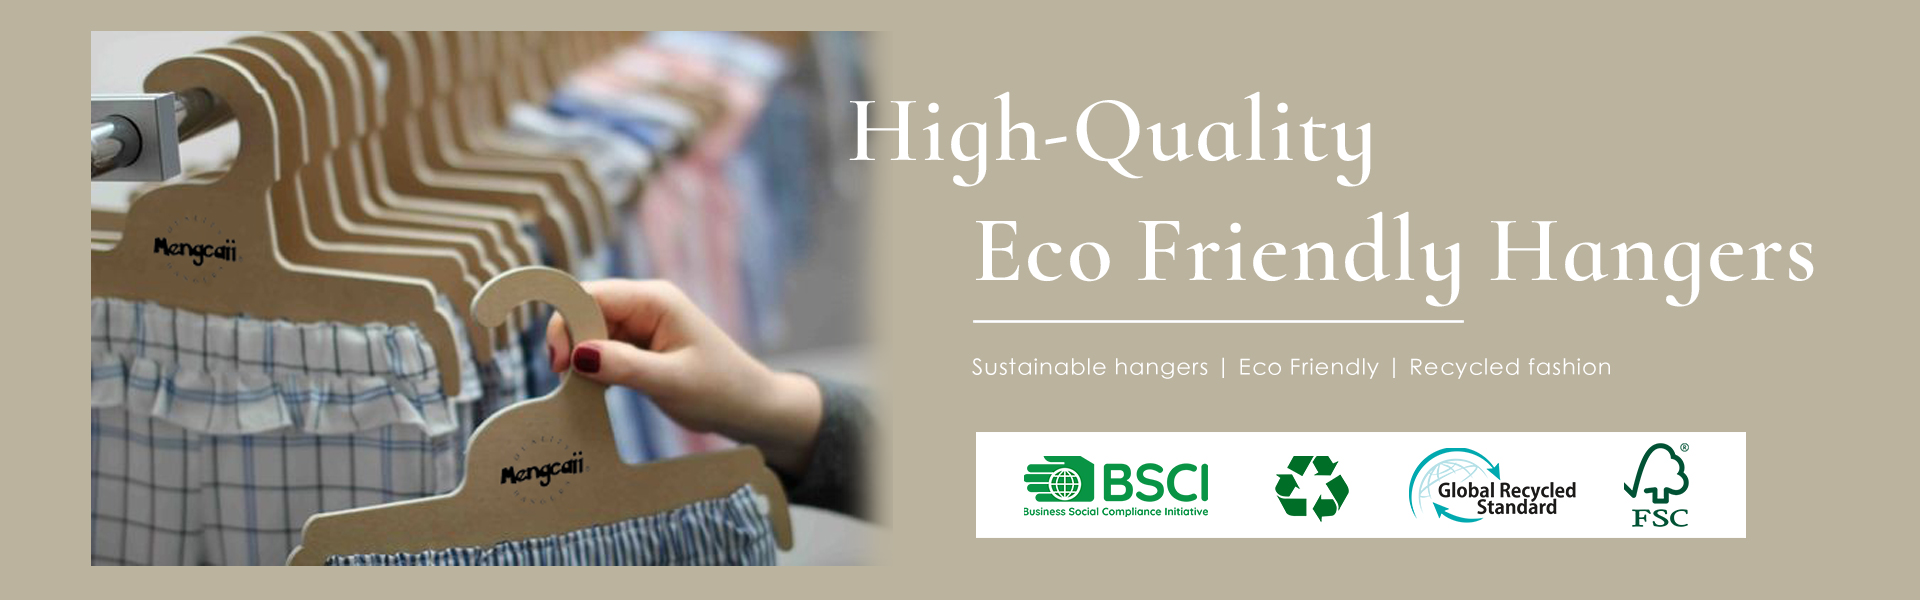 High-Quality Eco Friendly Paper hangers